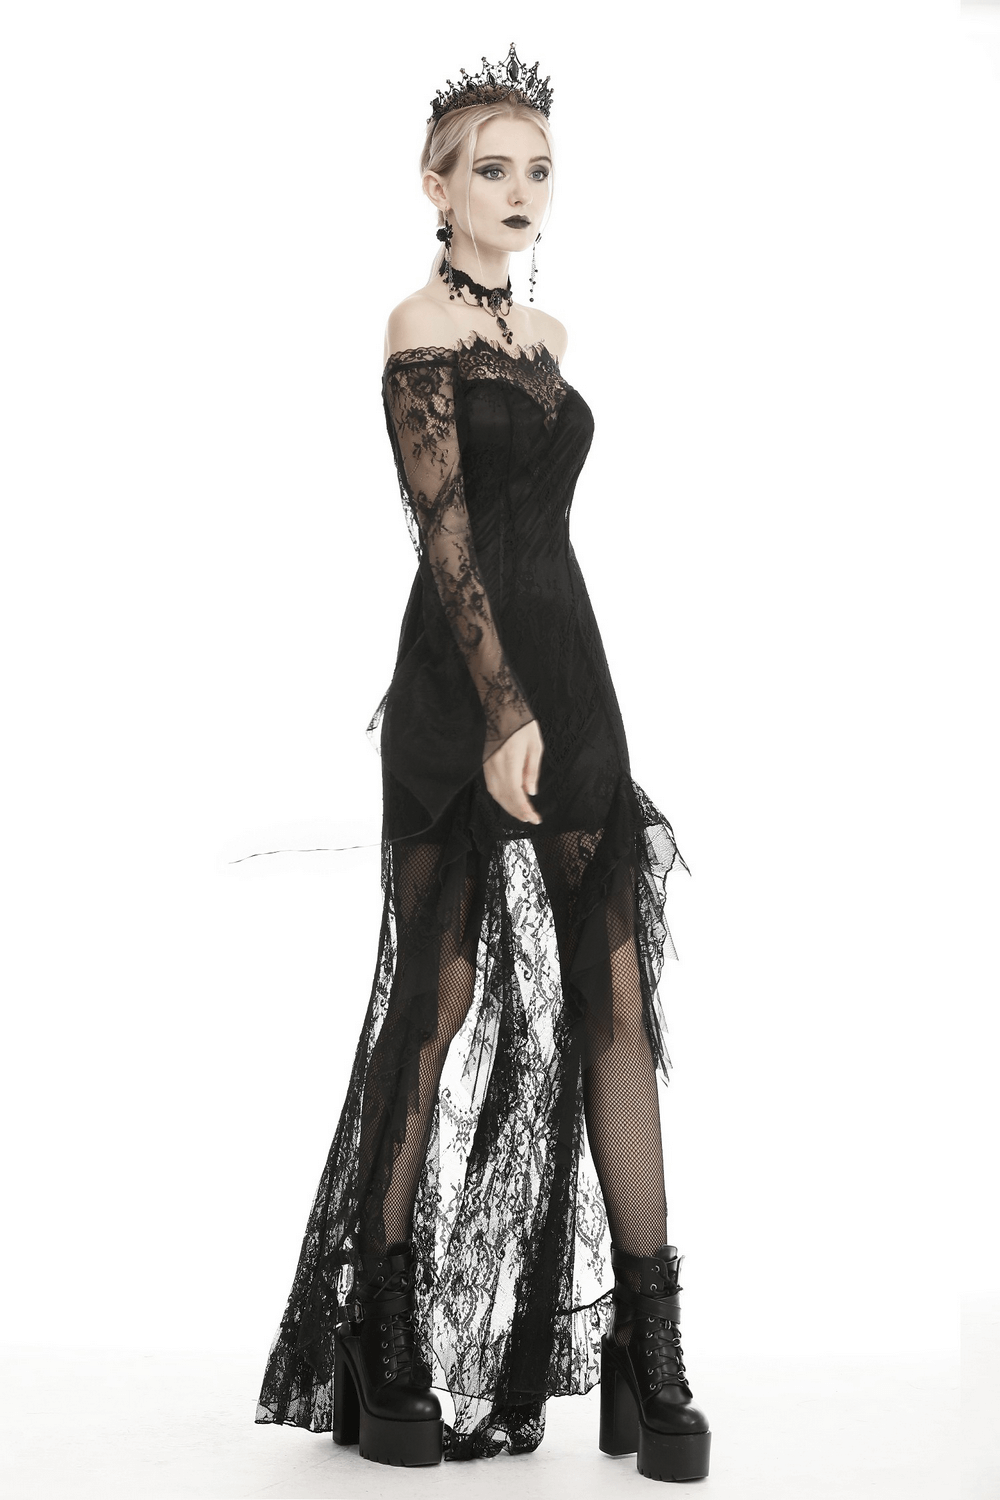 Elegant Black Lace Evening Gown with Gothic Flair